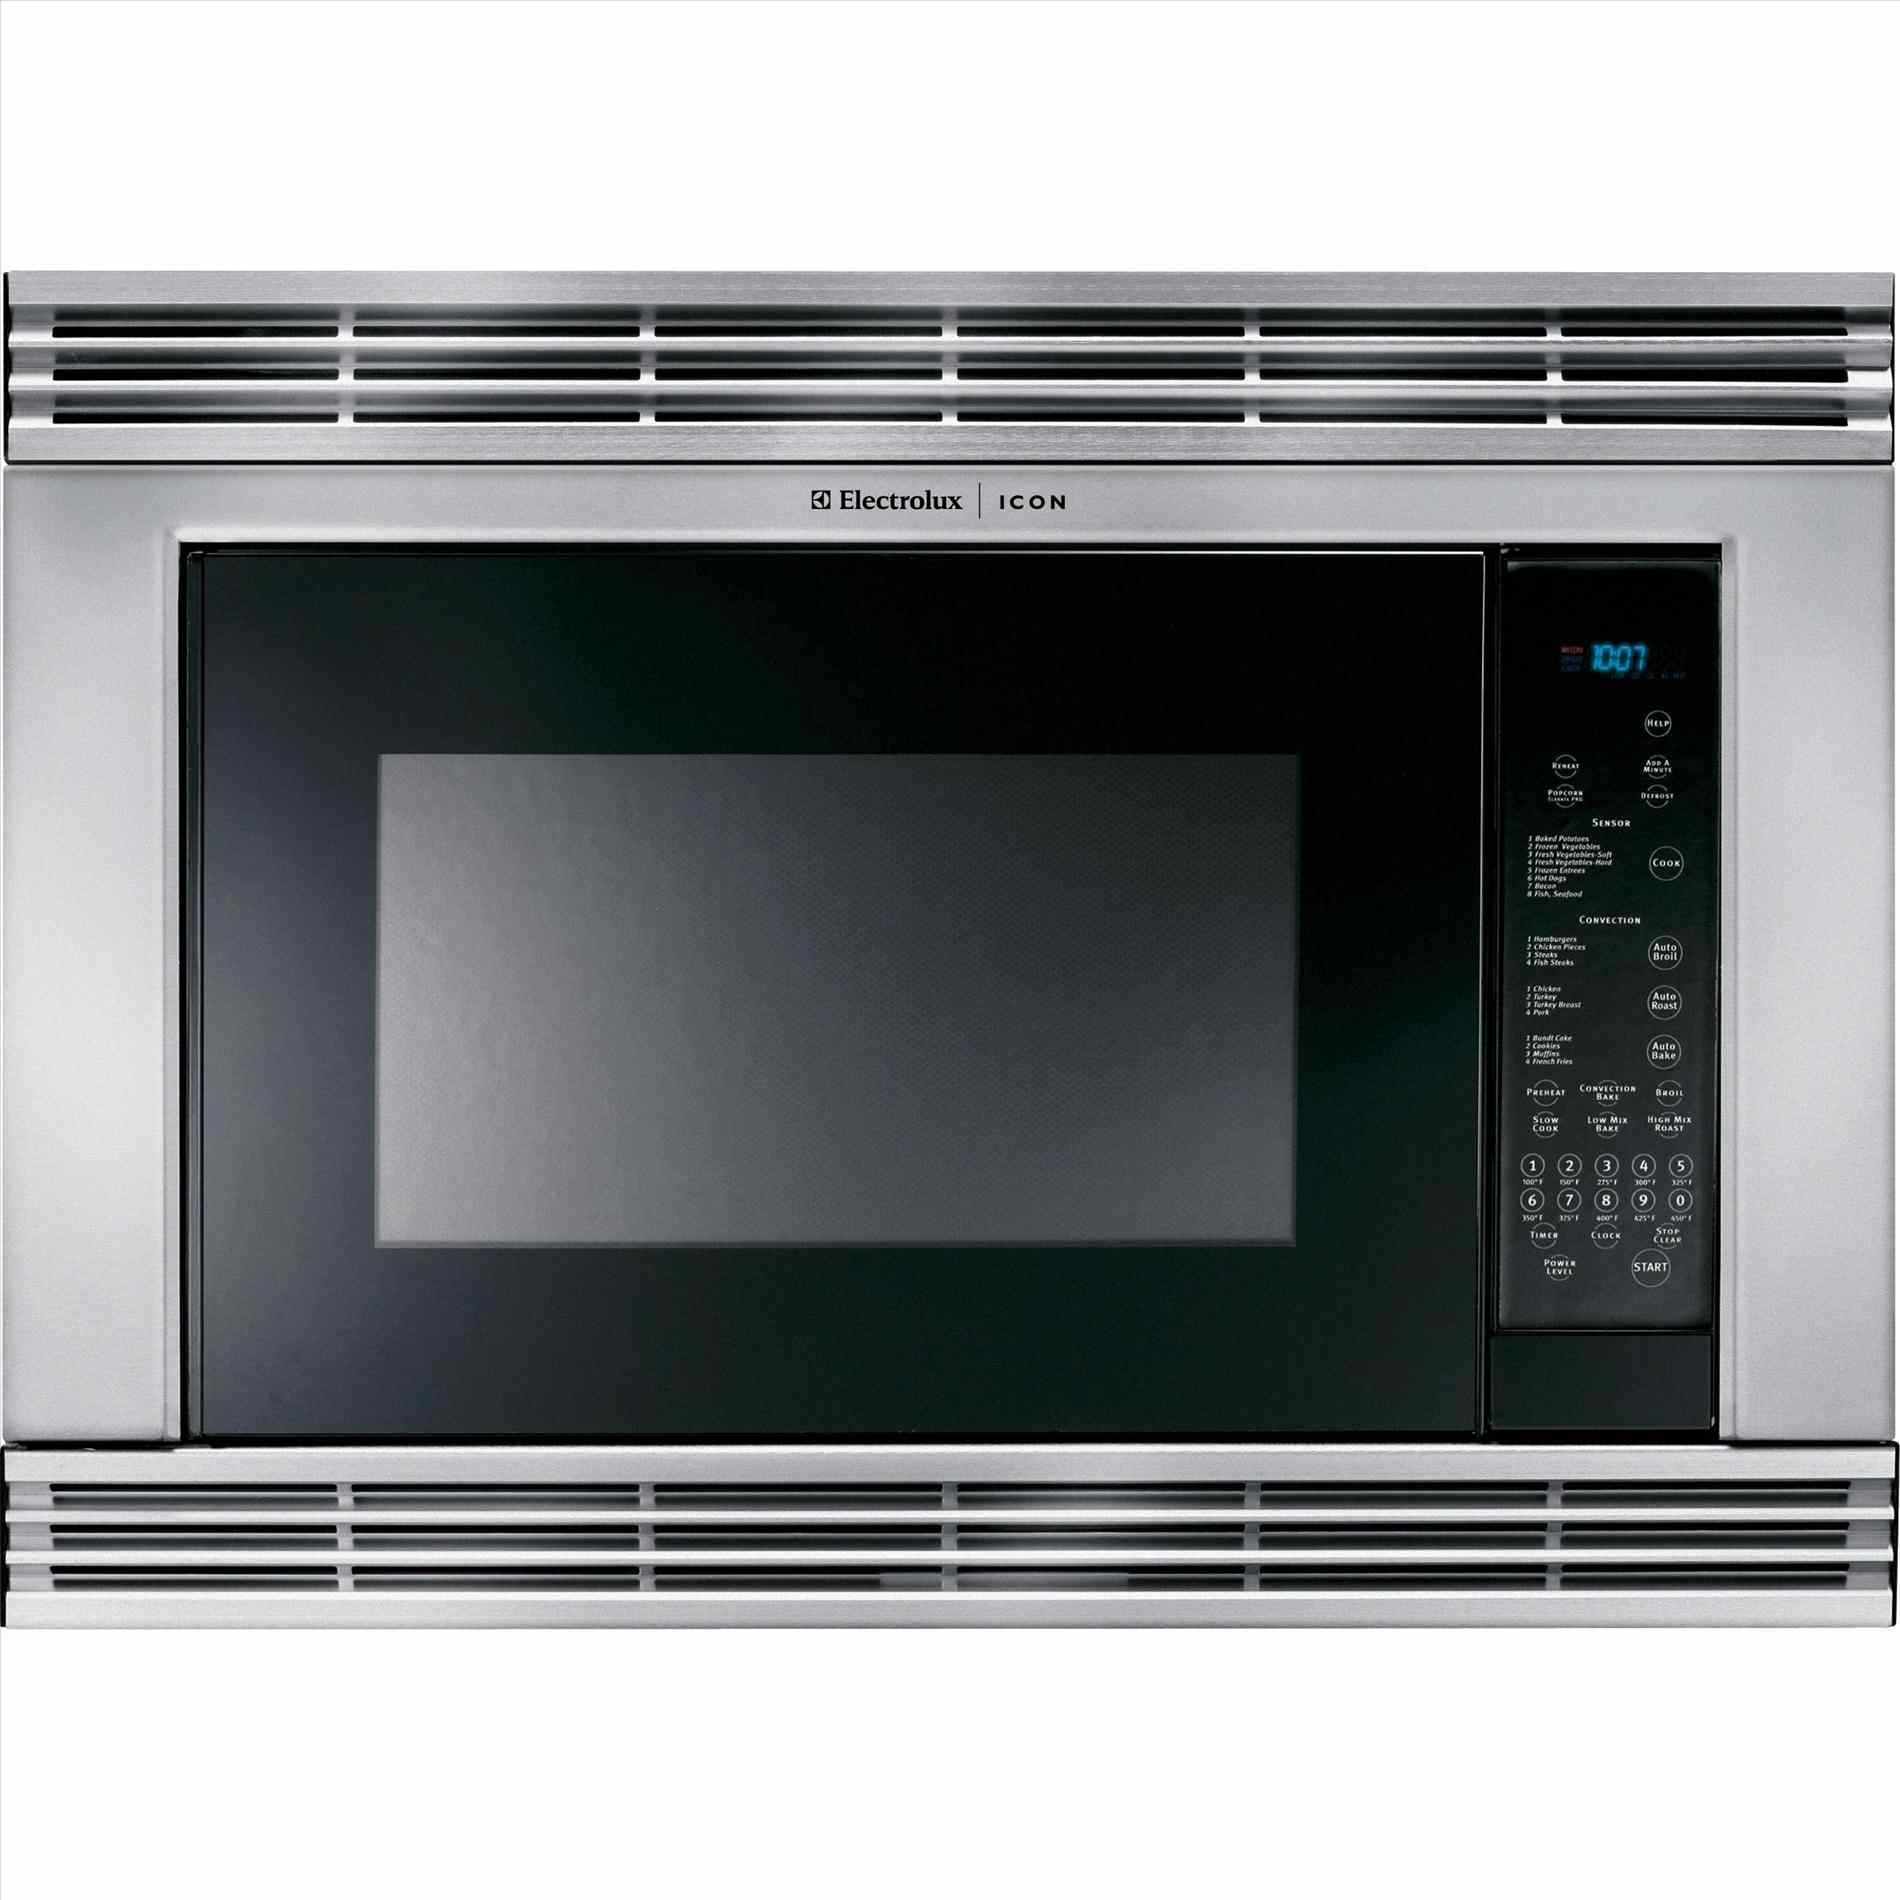 Kenmore elite convection microwave oven